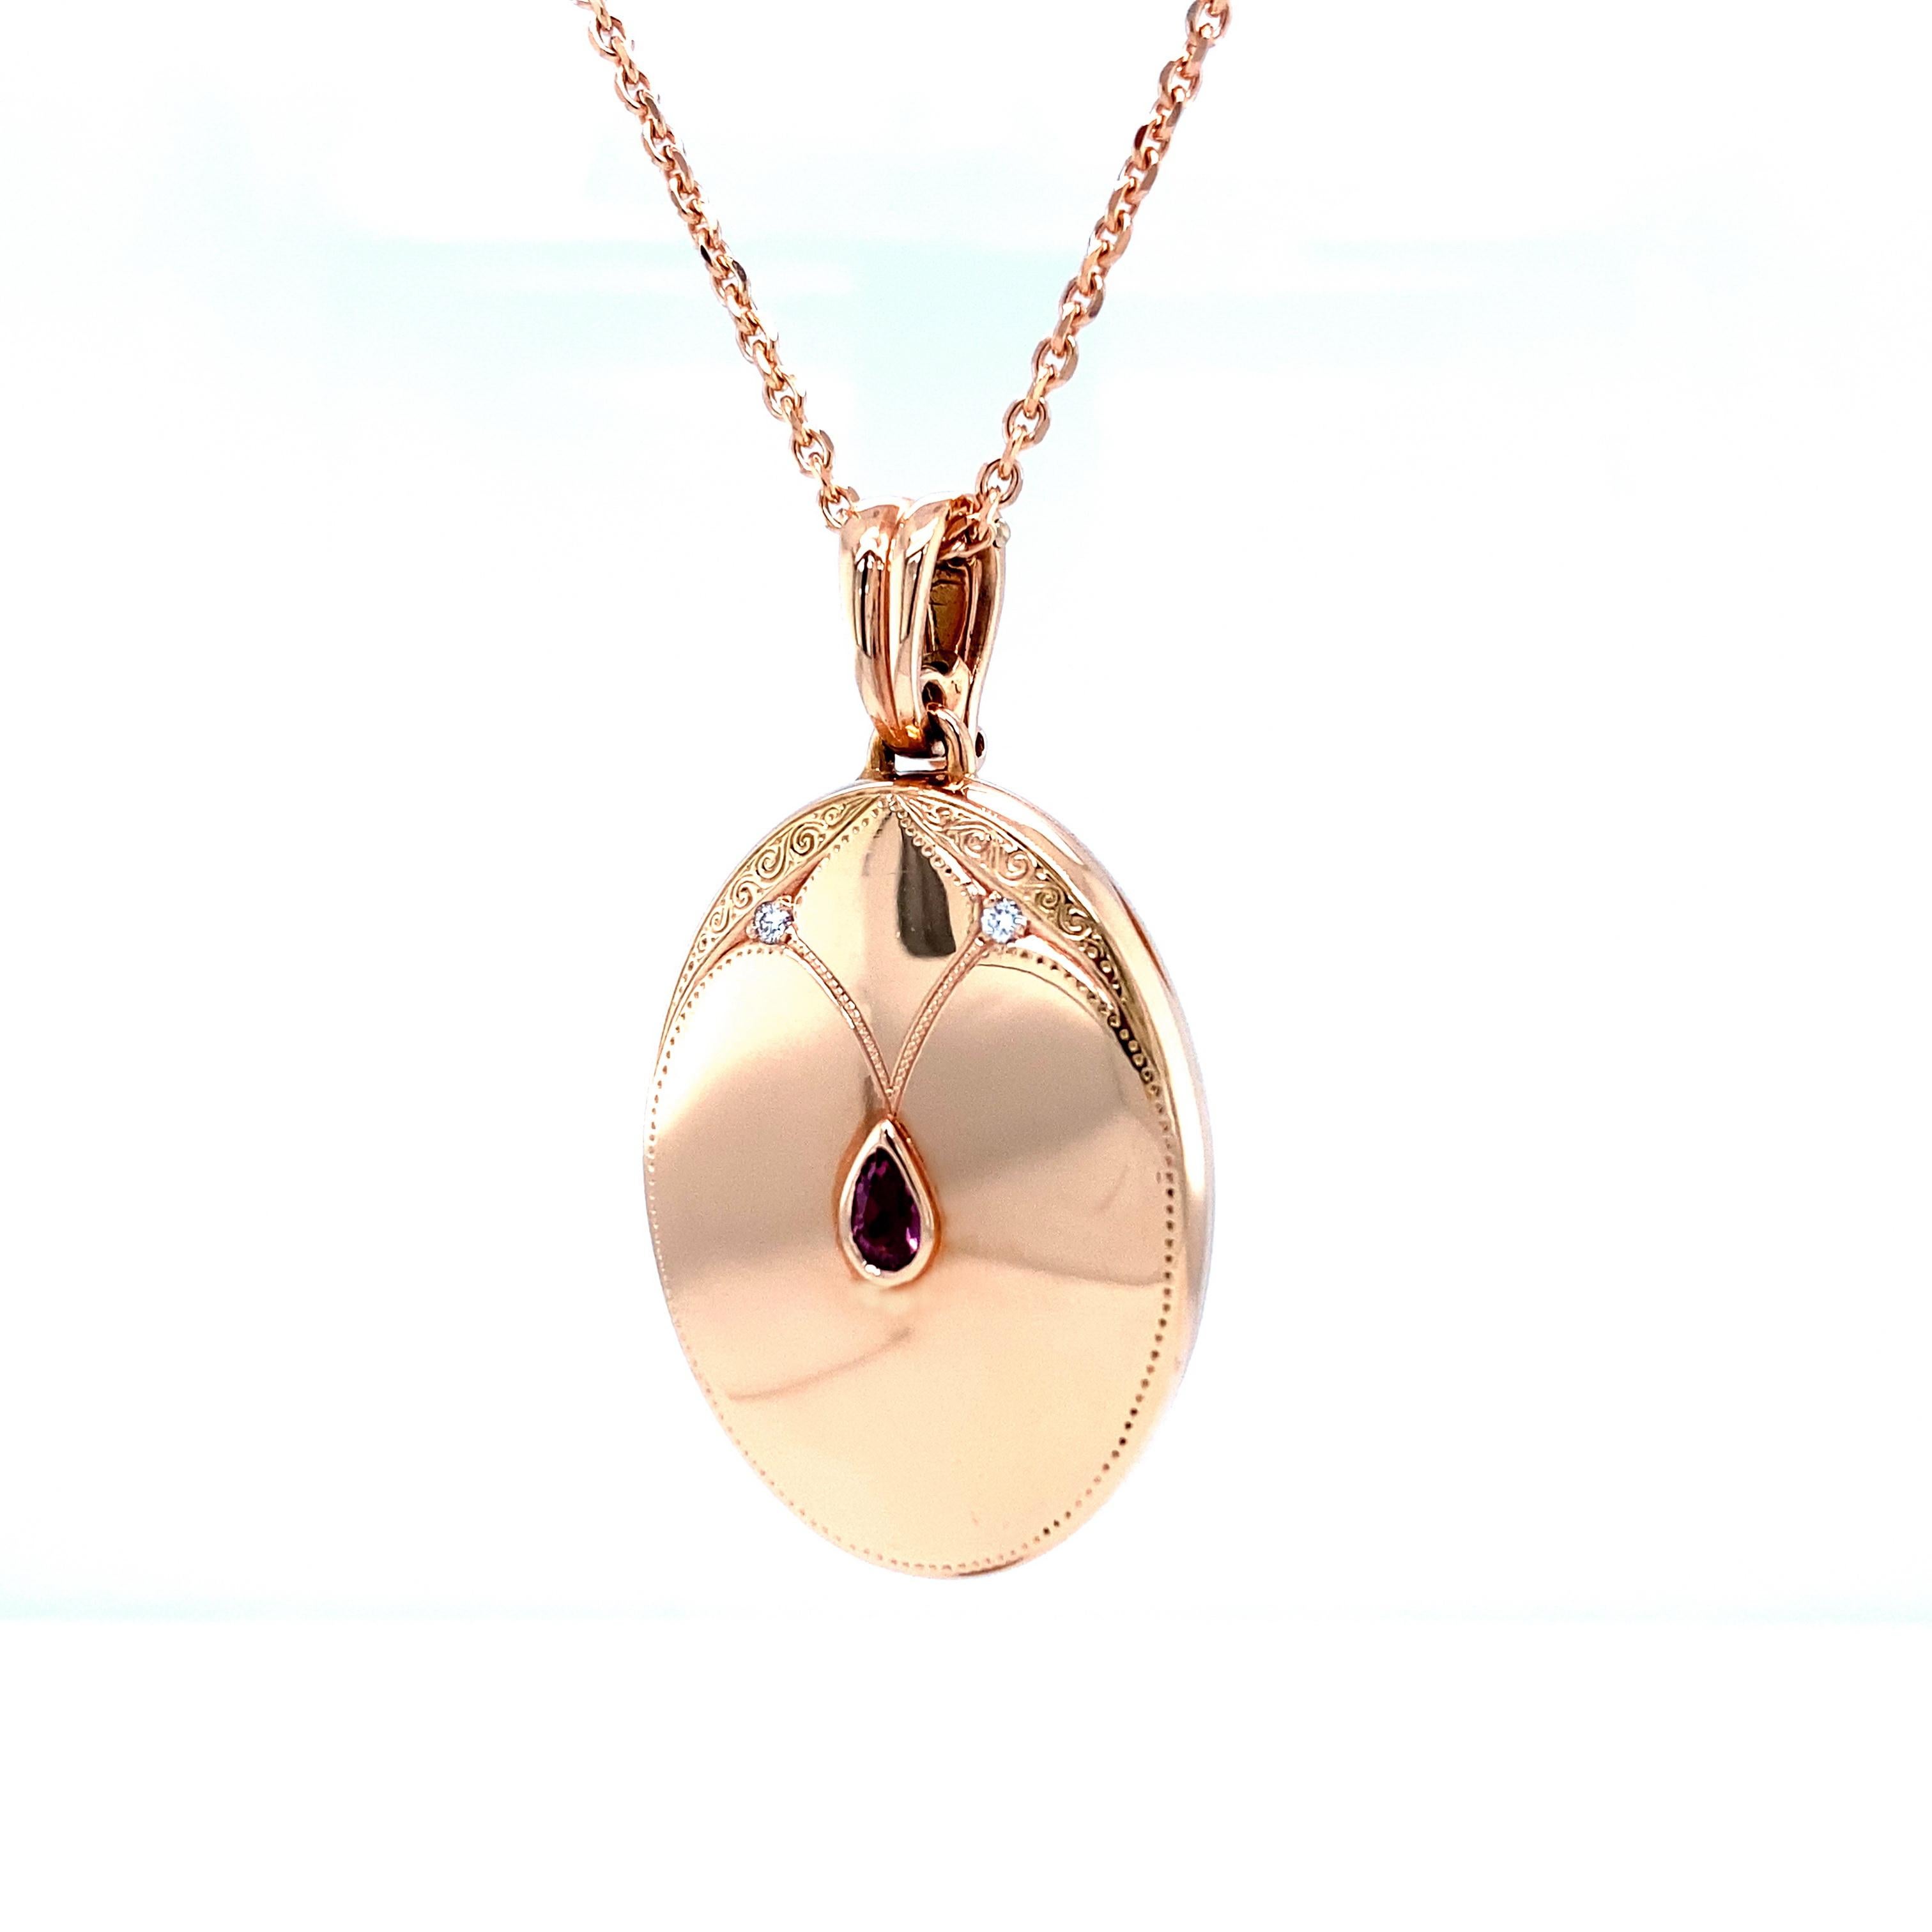 Victor Mayer oval Art Nouveau pendant locket 18k rose gold, 2 diamonds, total 0.04 ct, G VS, pink pear shaped Tourmaline

About the creator Victor Mayer
Victor Mayer is internationally renowned for elegant timeless designs and unrivalled expertise